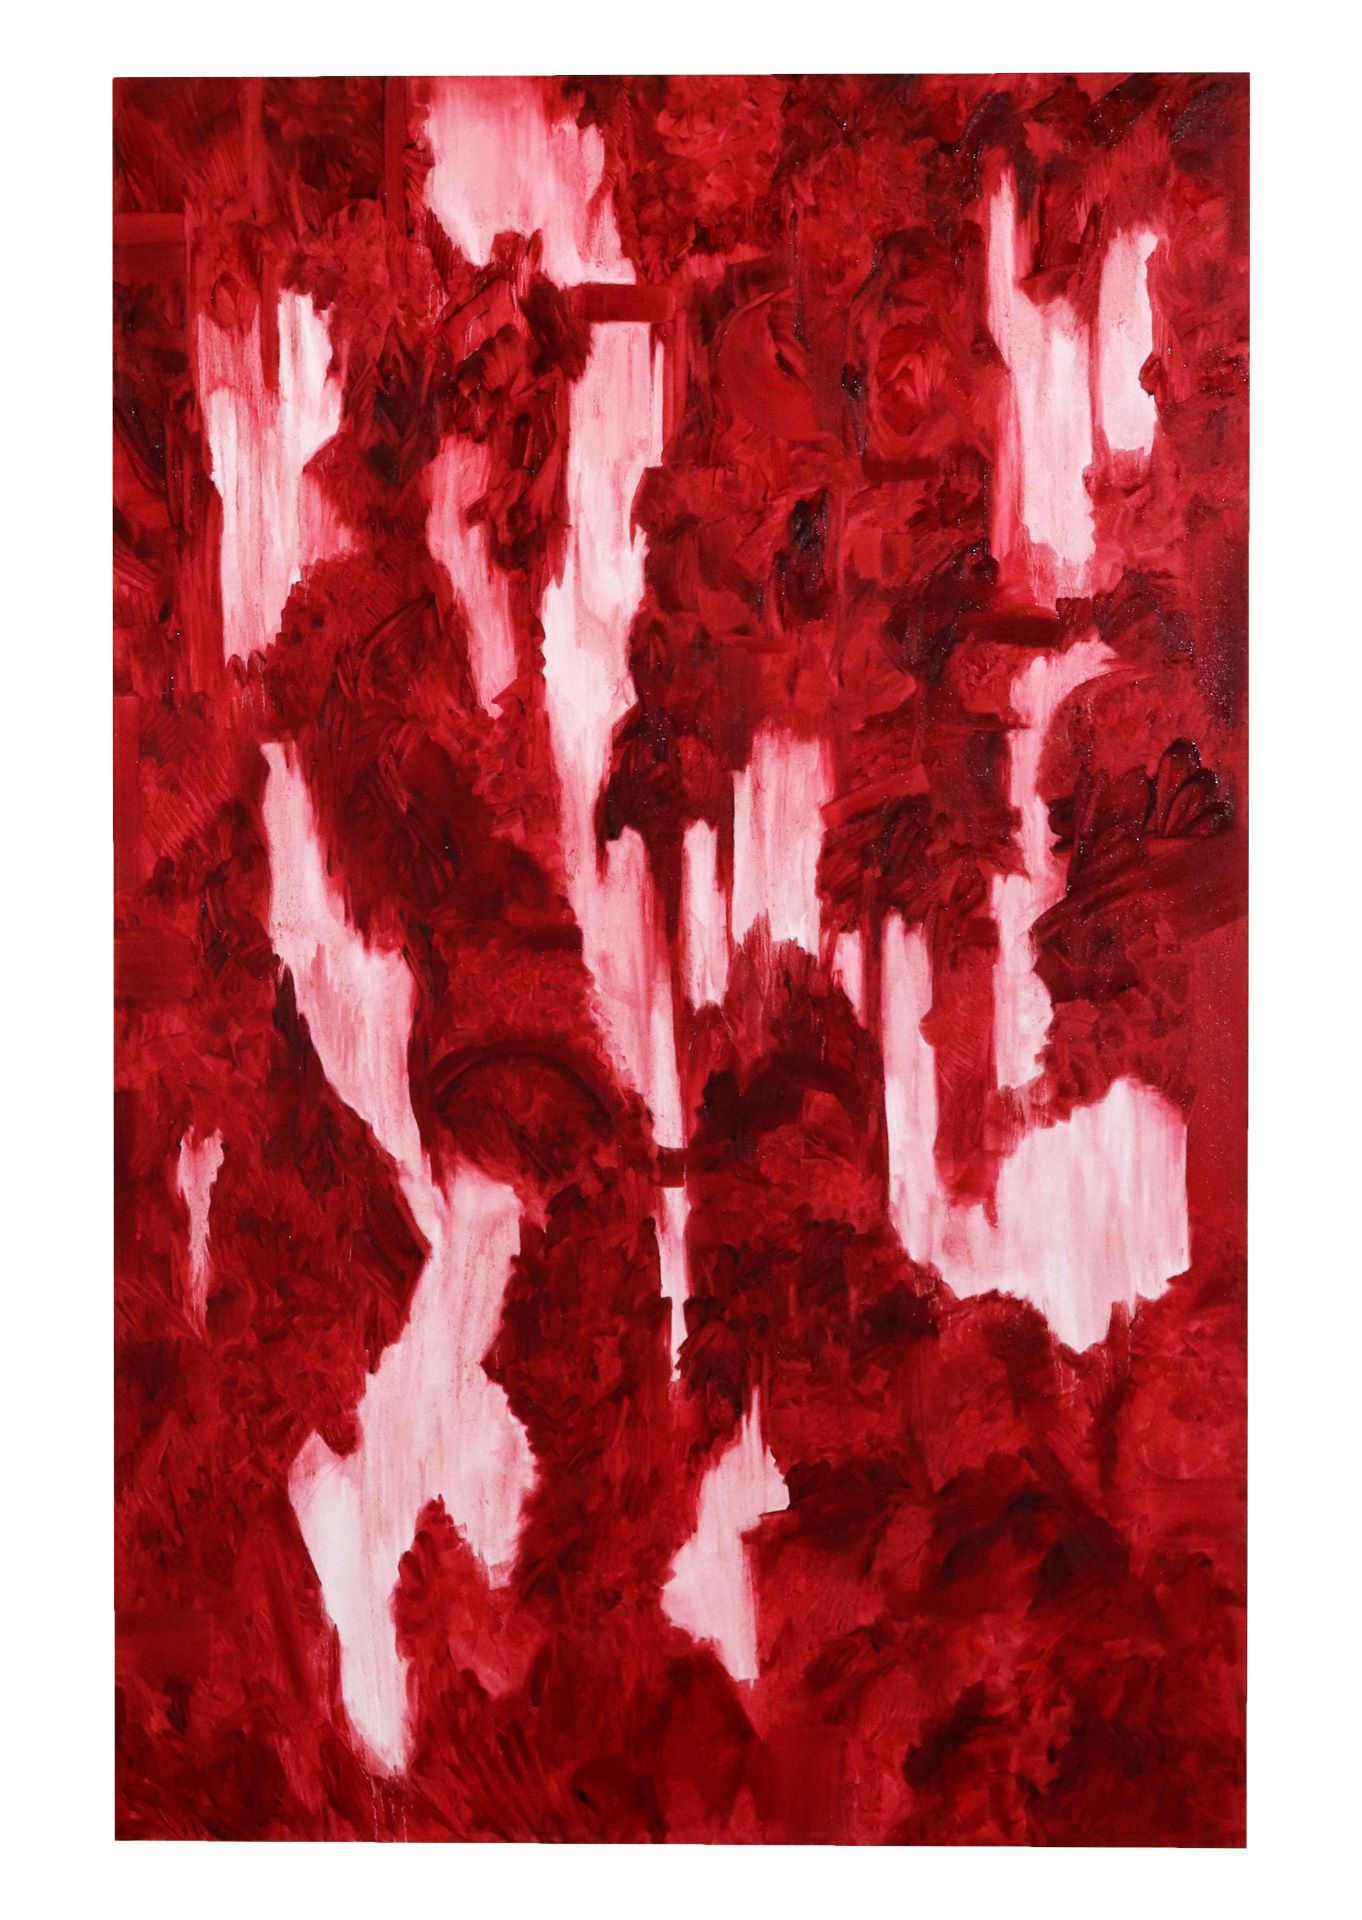 Untitled (Red) 245cm x 157cm, Oil on Canvas, 2022